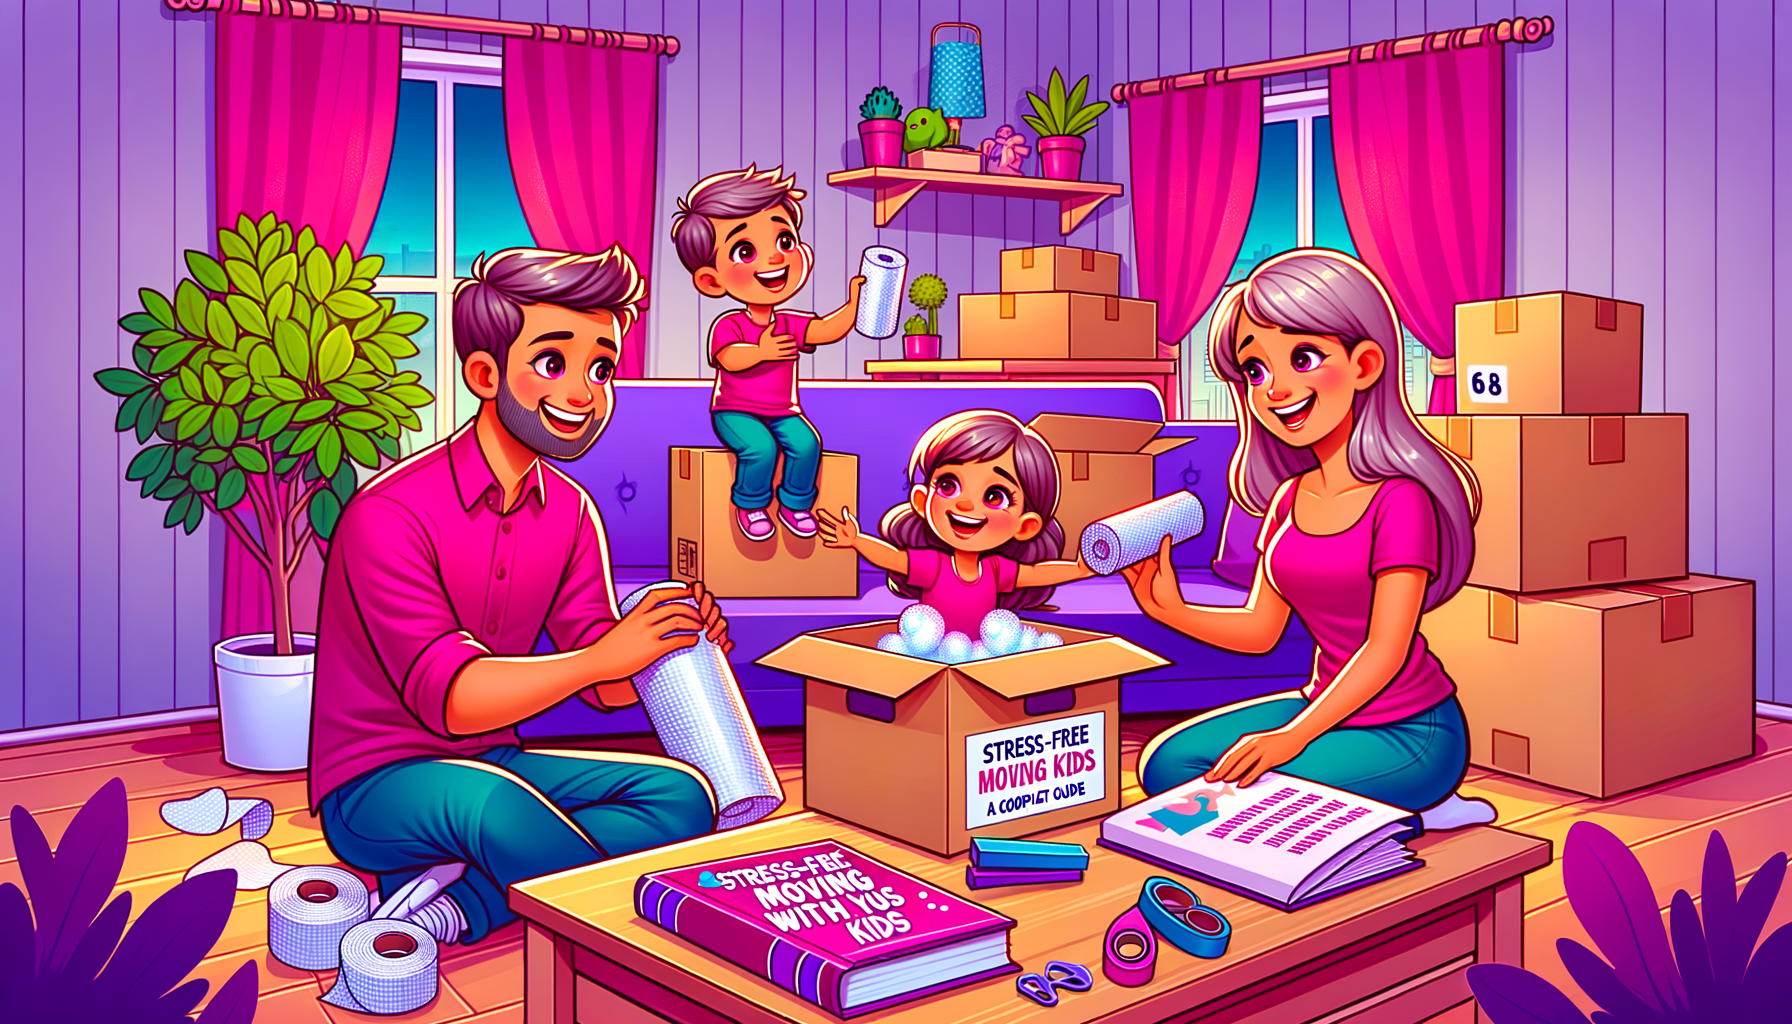 Illustration of a fuschia colored cartoon family happily organizing boxes for a stress-free move.